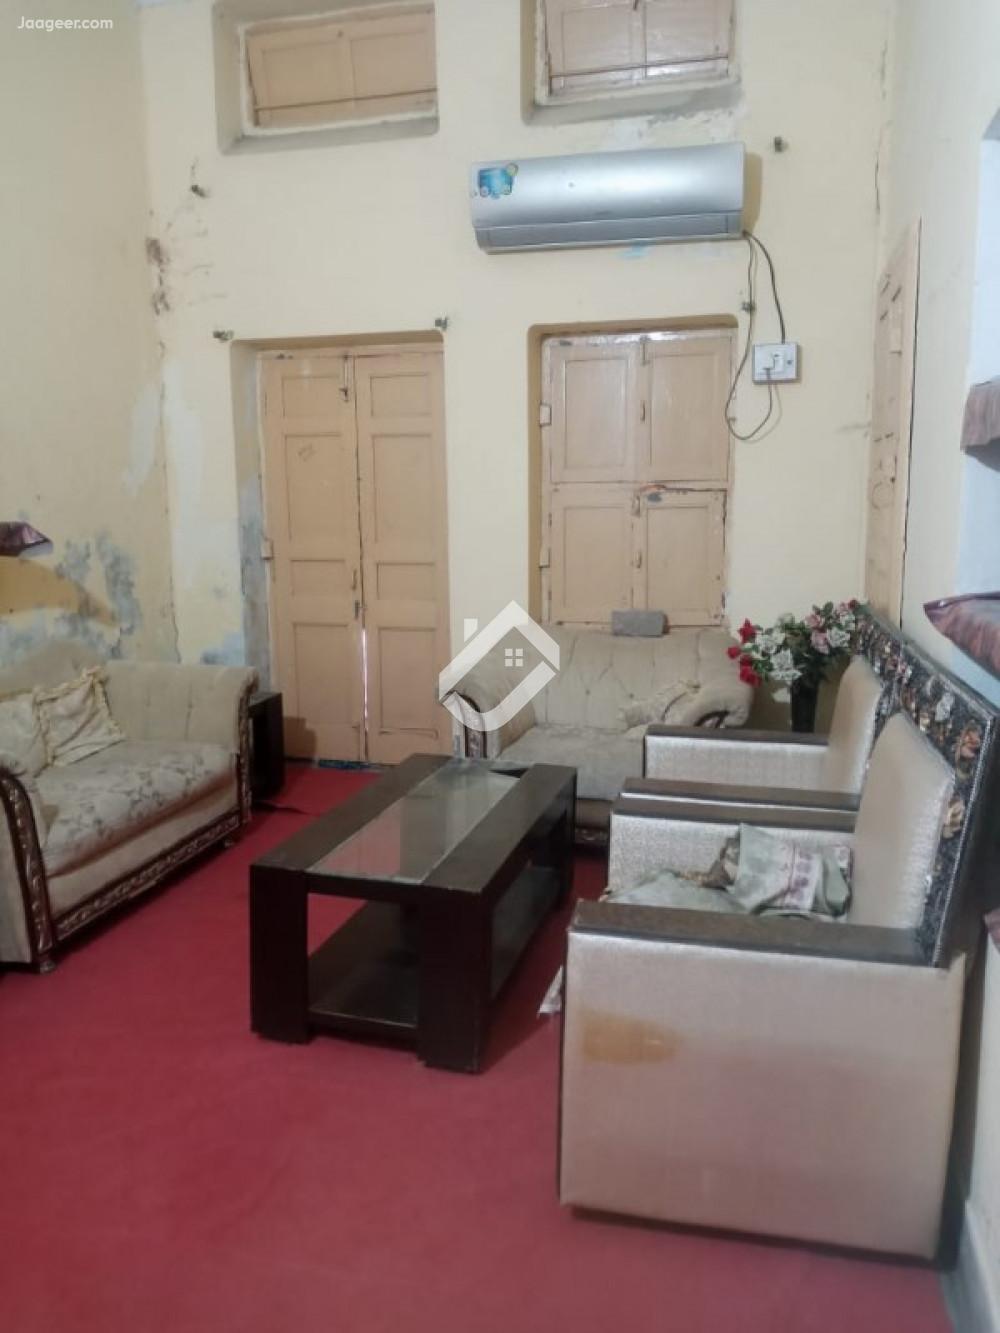 View  4 Marla Double Storey House For Sale In Faisal Town  in Faisal Town, Islamabad